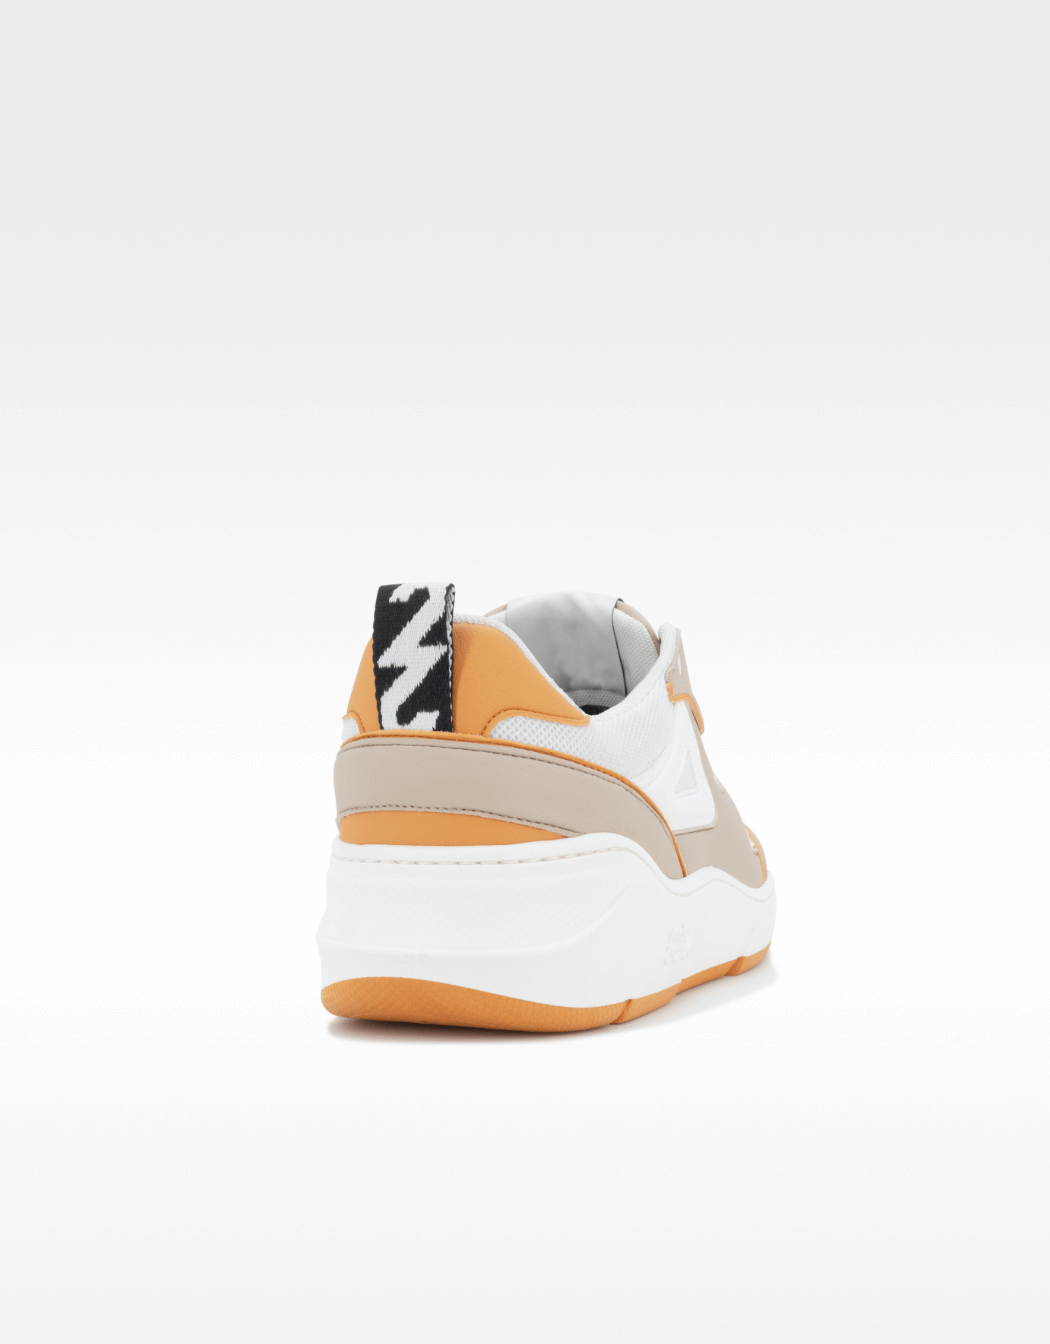 sneakers-neo-loopr3-2ndechance-camel-recyclees-recyclable-madeinfrance-derriere